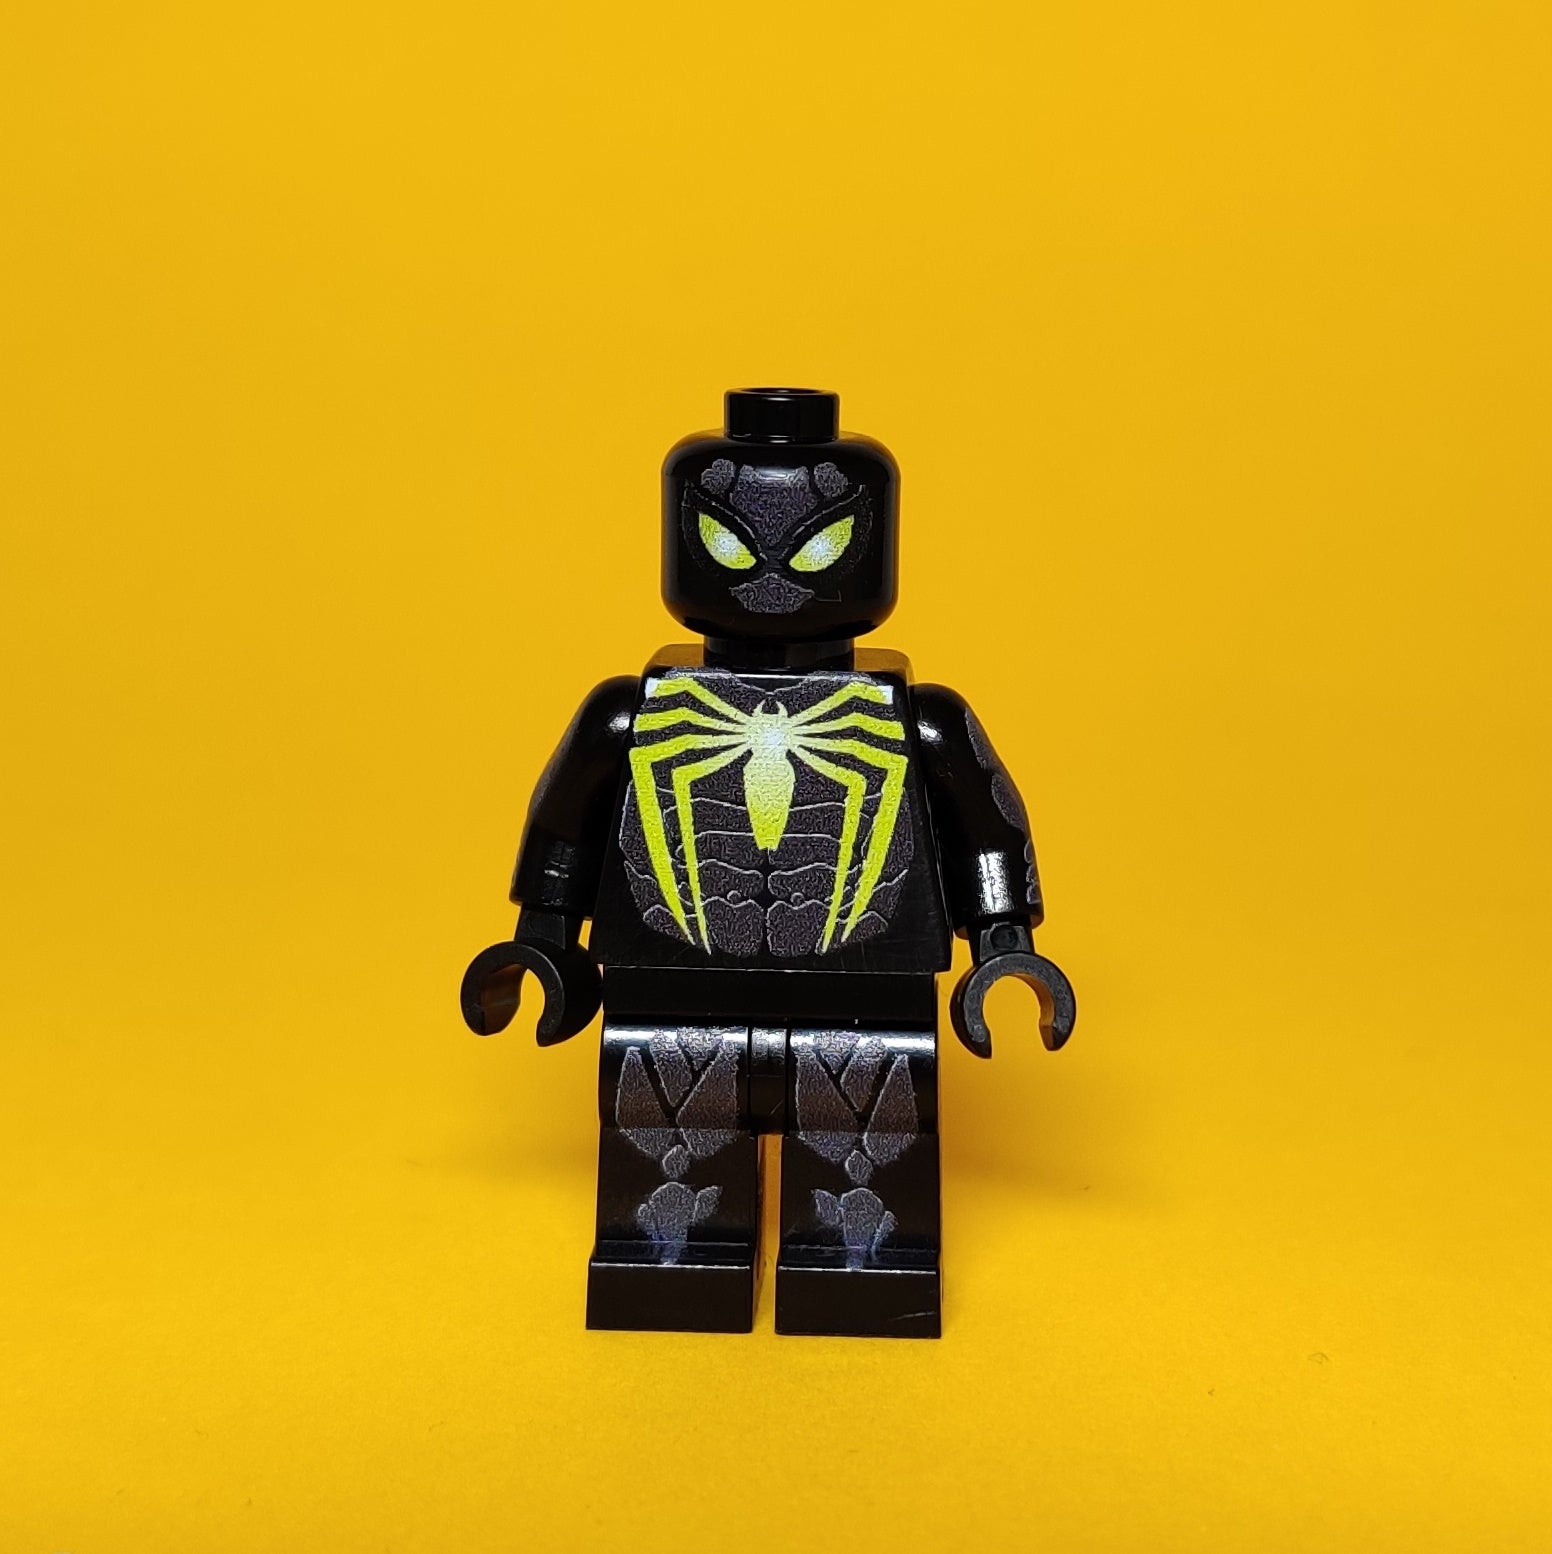 Exclusive Printed Minifigure A figure with unique,stunning design that can be found only in our store.